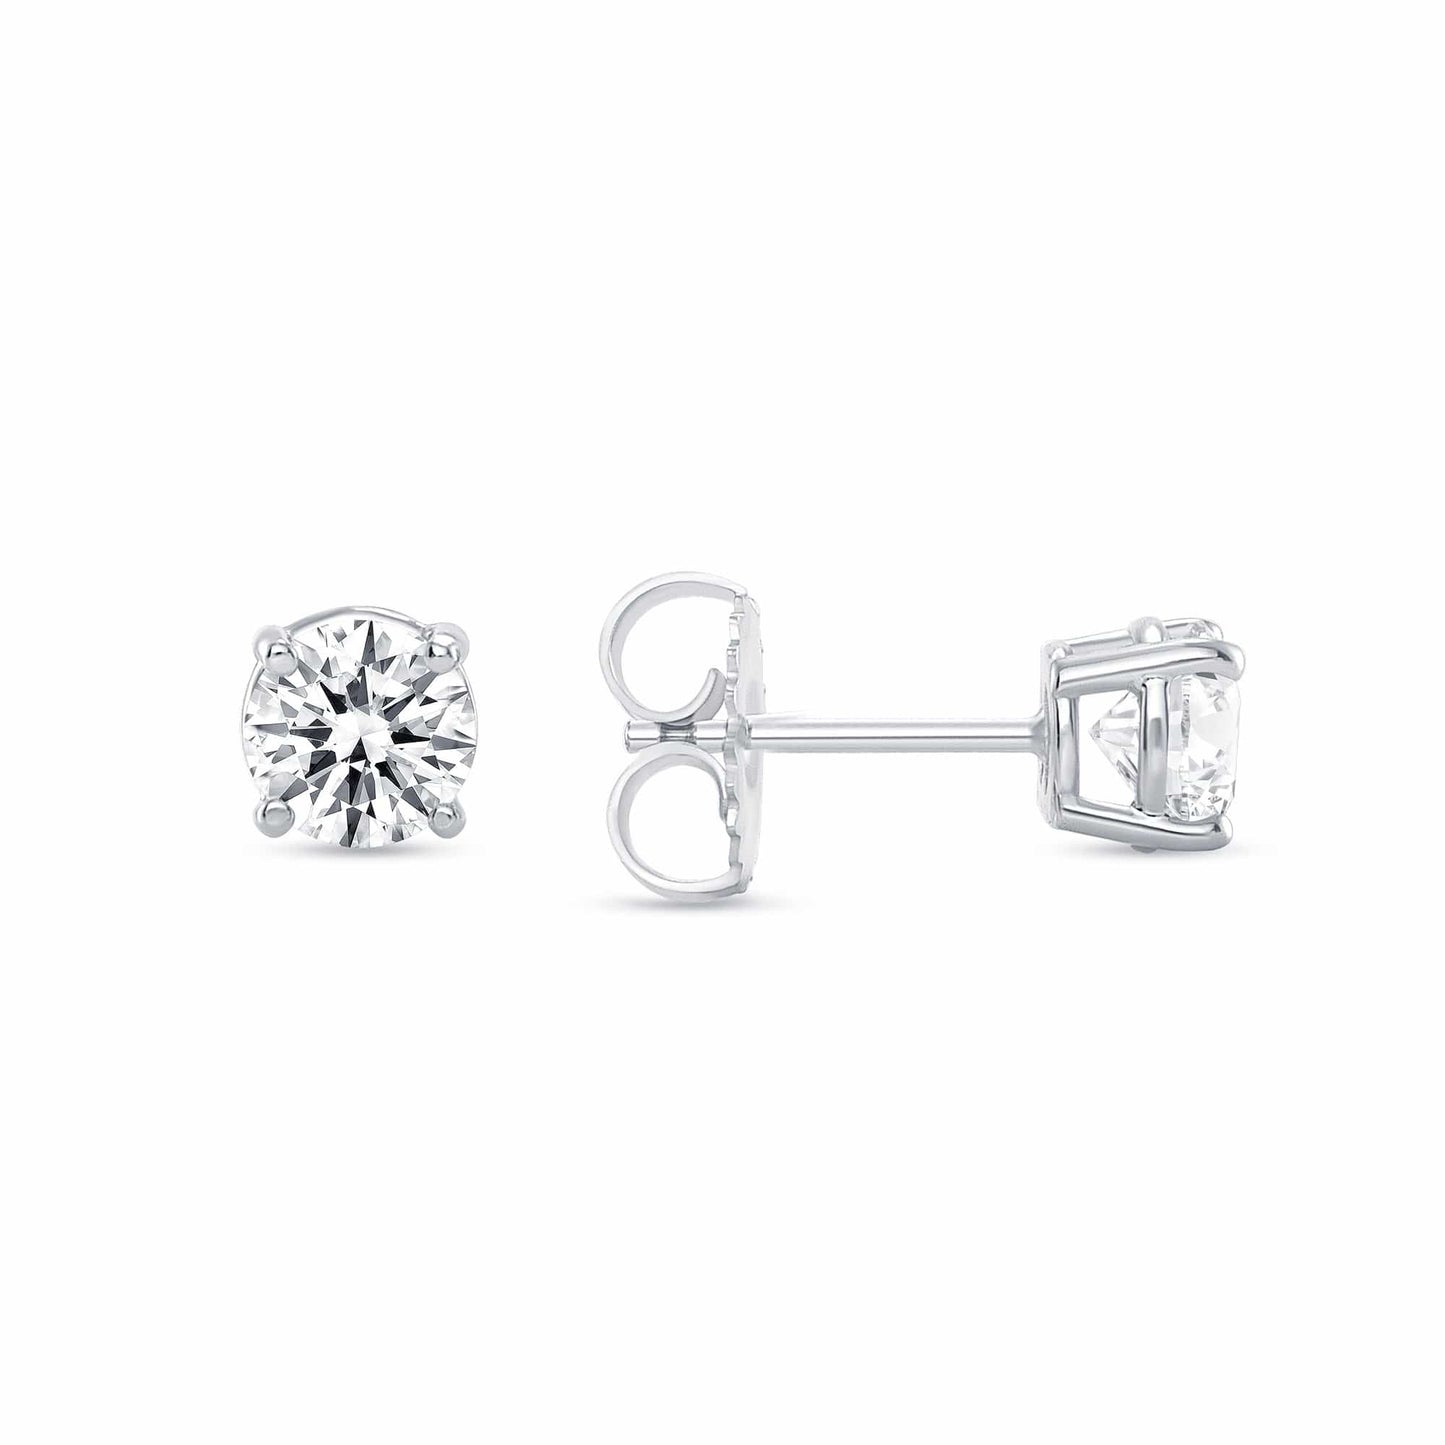 The Complete Guide to Buying Diamond Stud Earrings